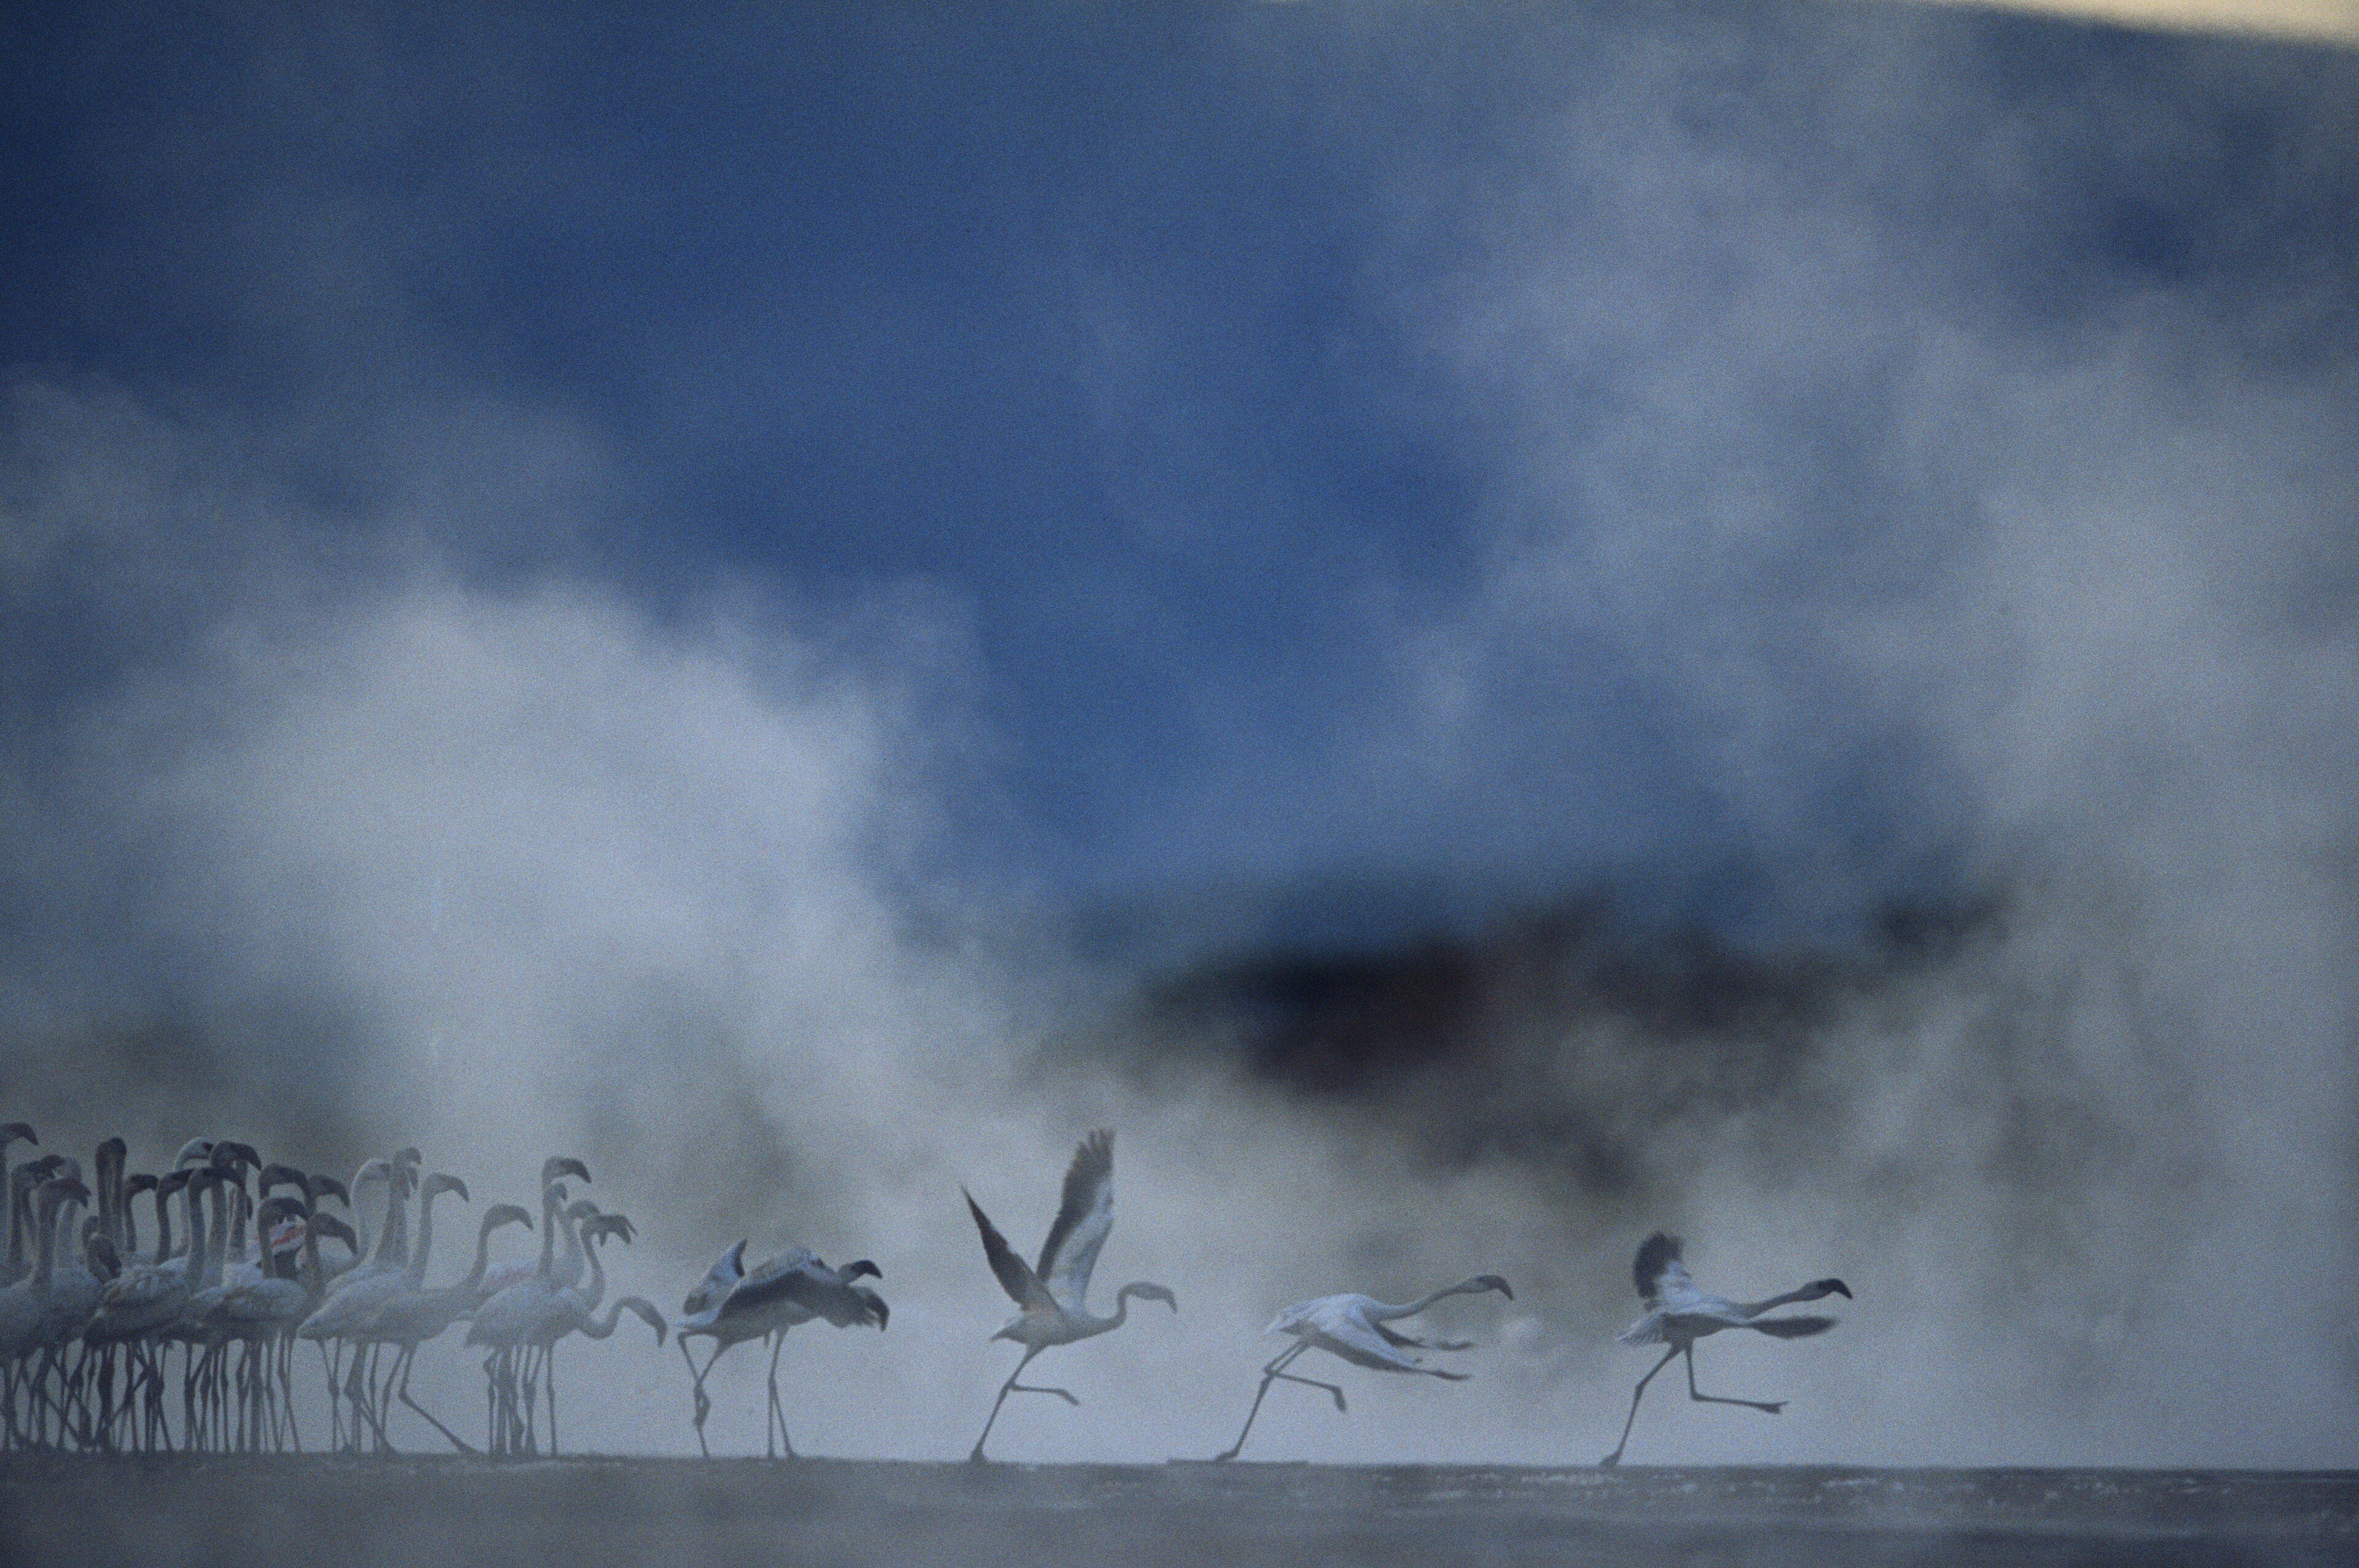 Flamingos taking off through the thick mist of dusk.